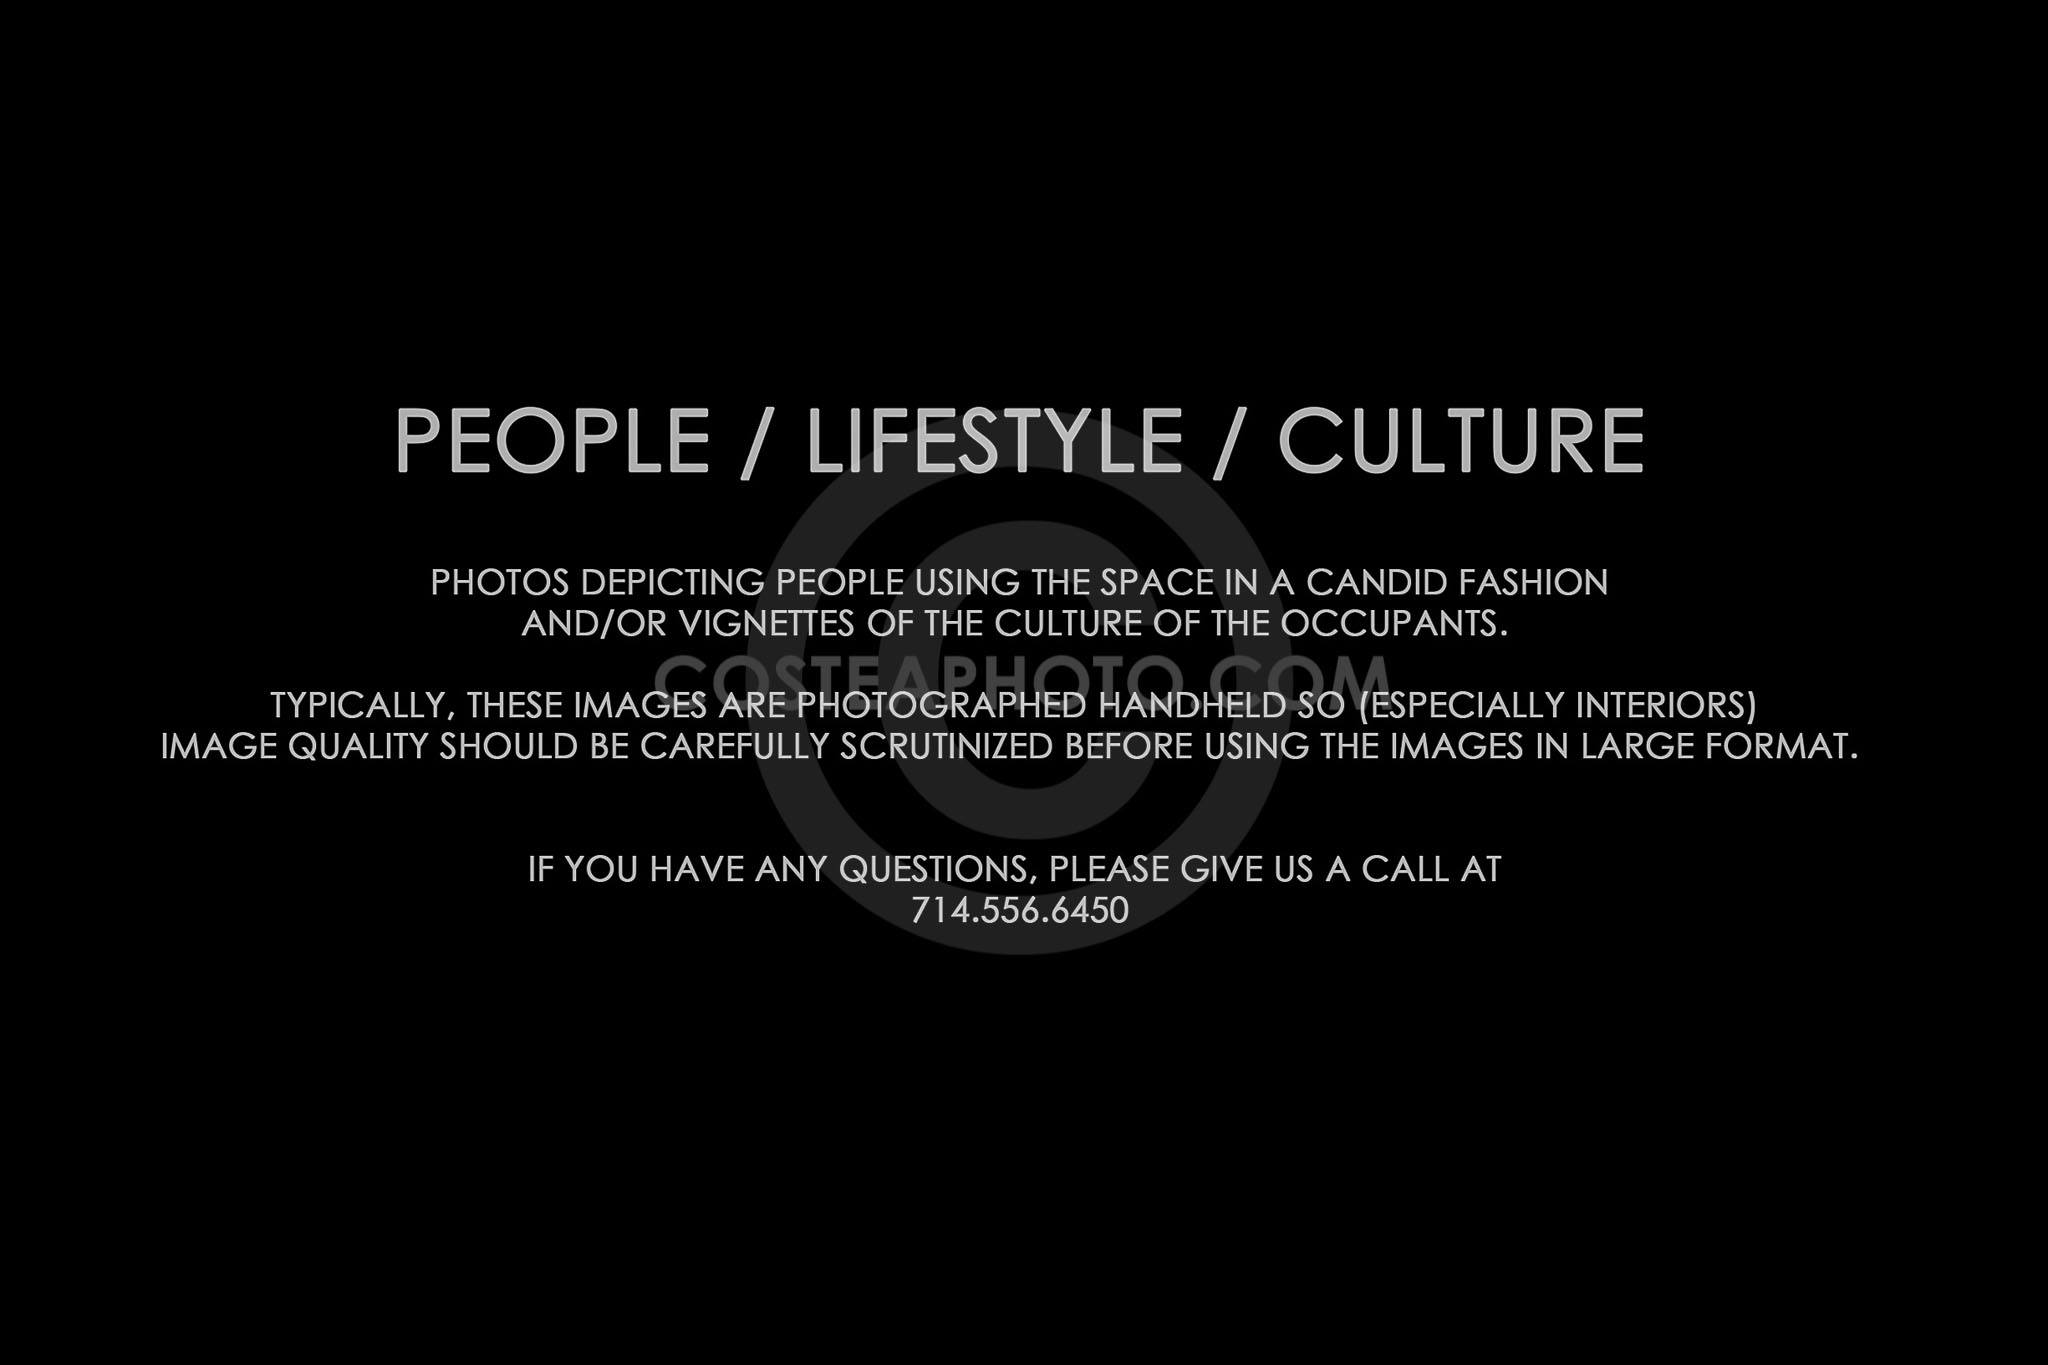 (200) TITLE PAGE - PEOPLE LIFESTYLE